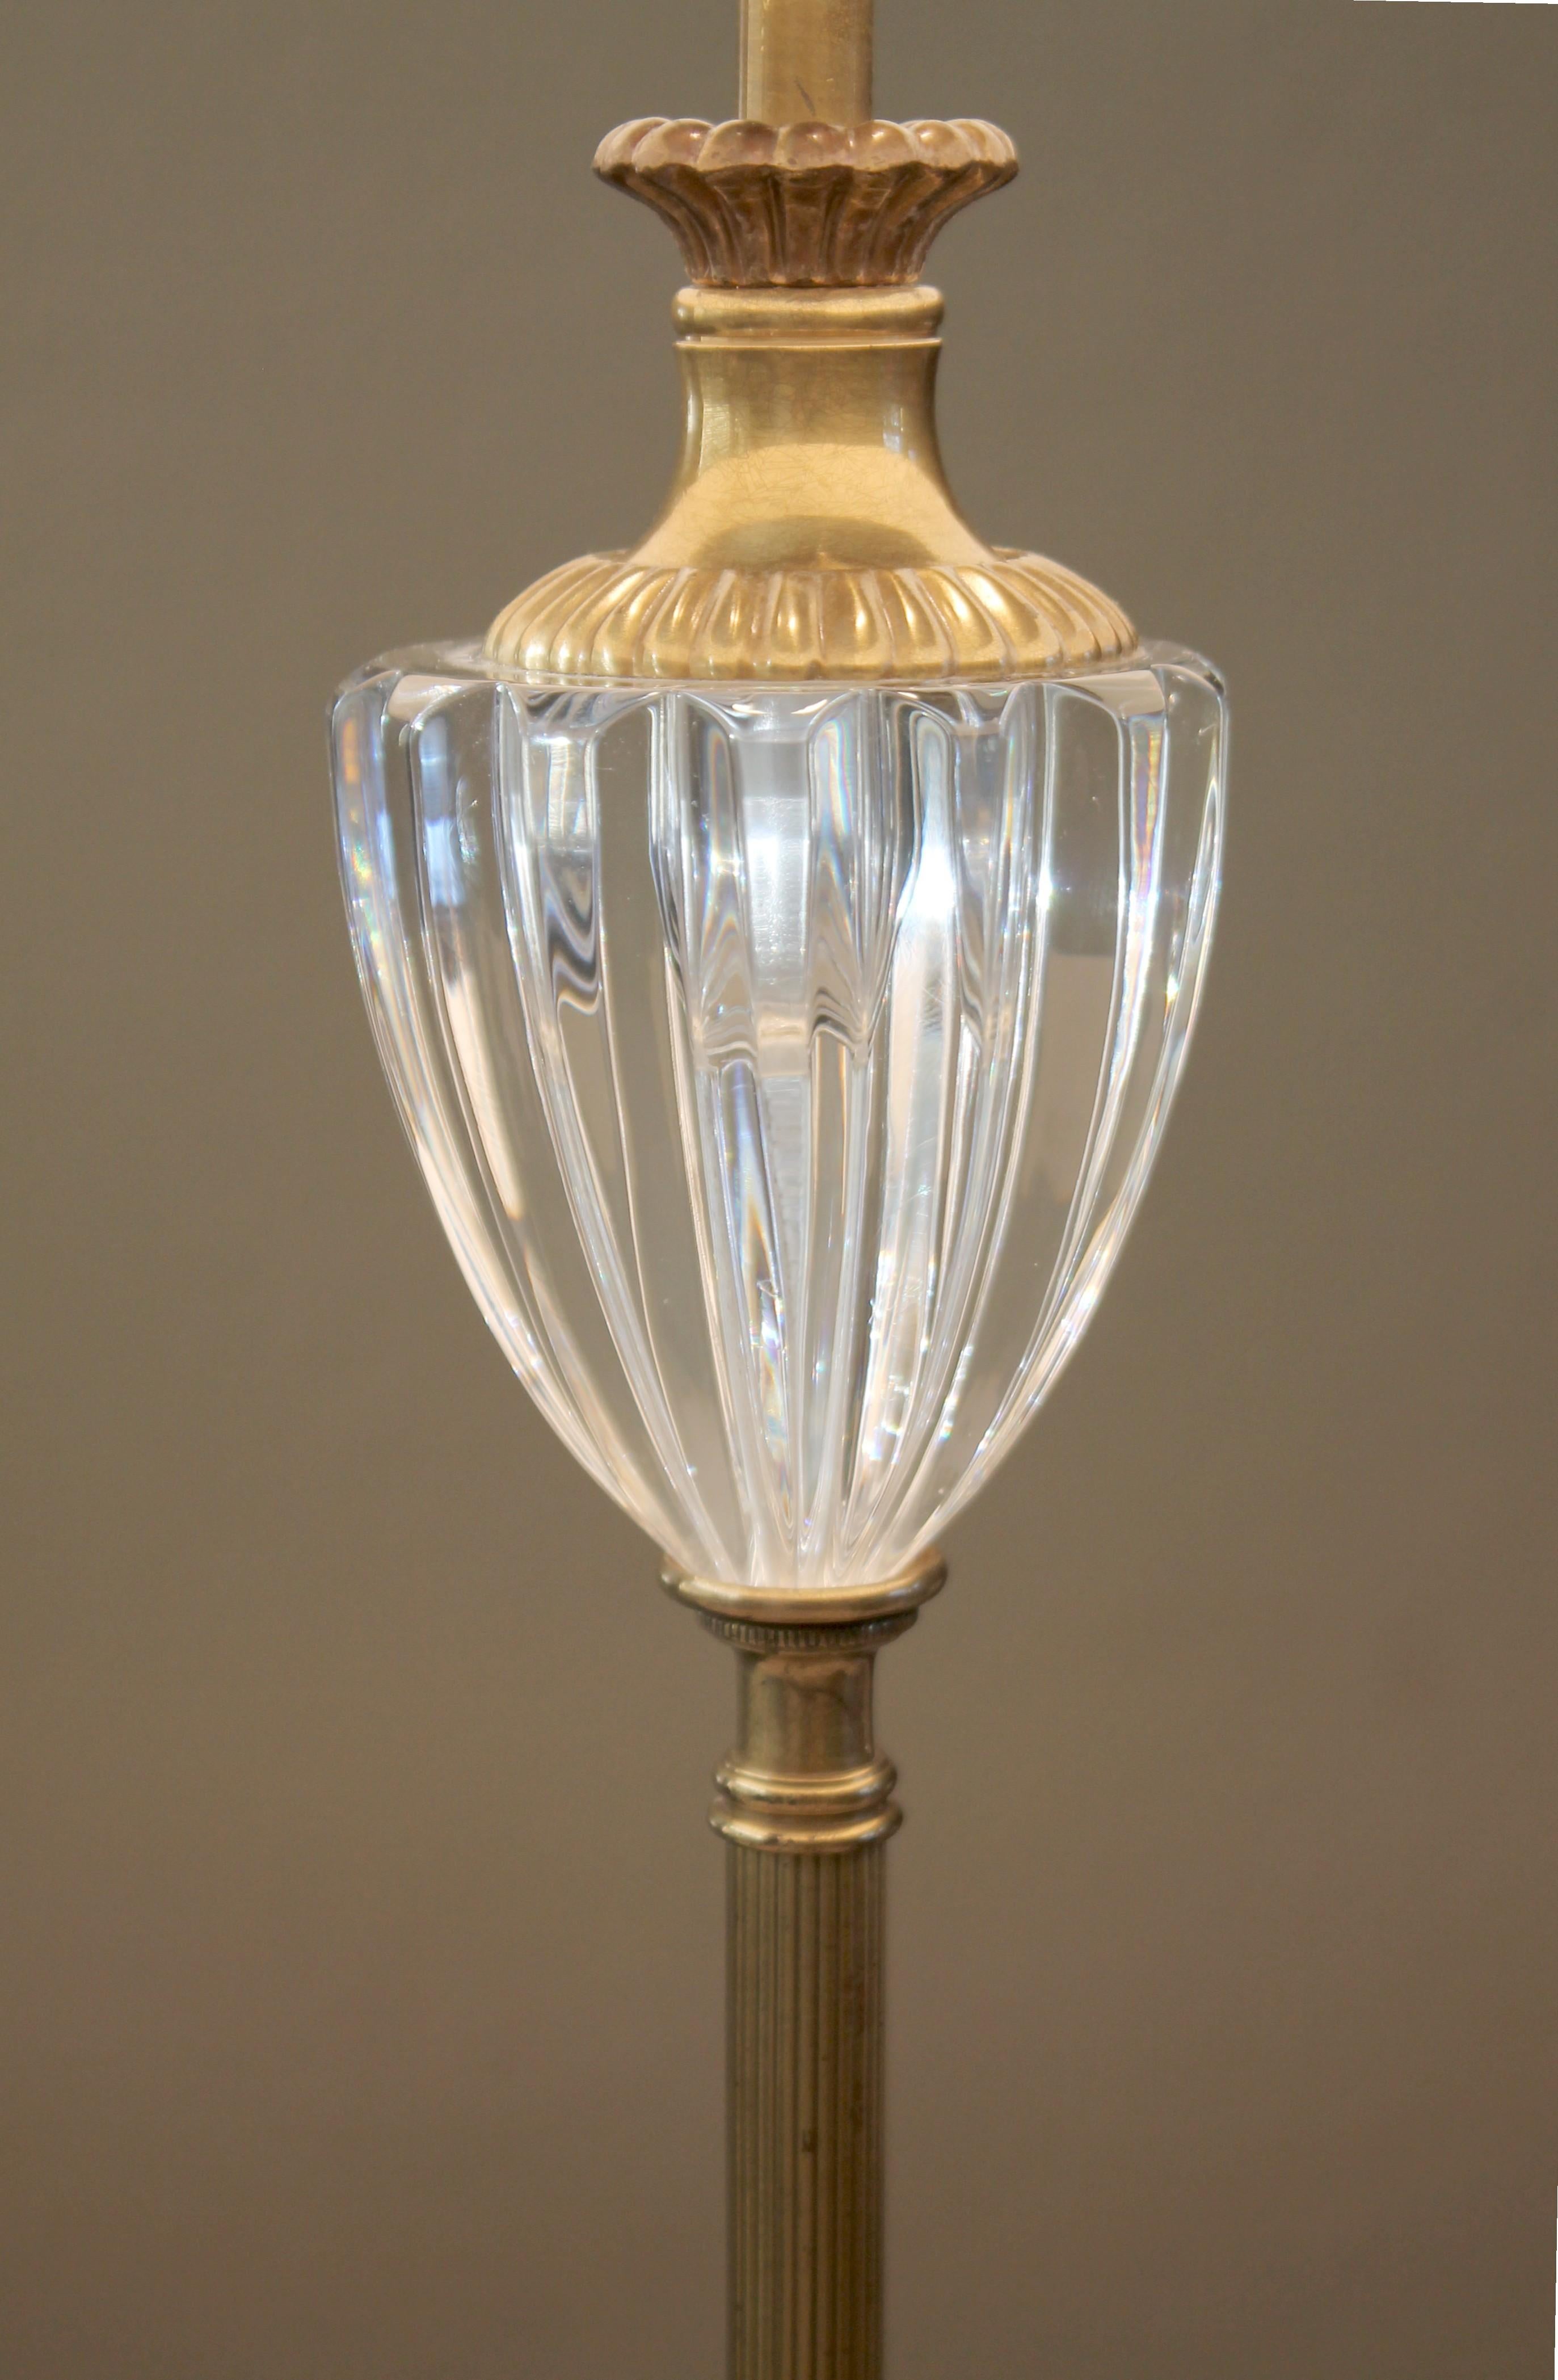 Gorgeous FREDERICK COOPER Crystal Table Lamp 1970's Hollywood Regency Decor In Good Condition For Sale In Peoria, AZ